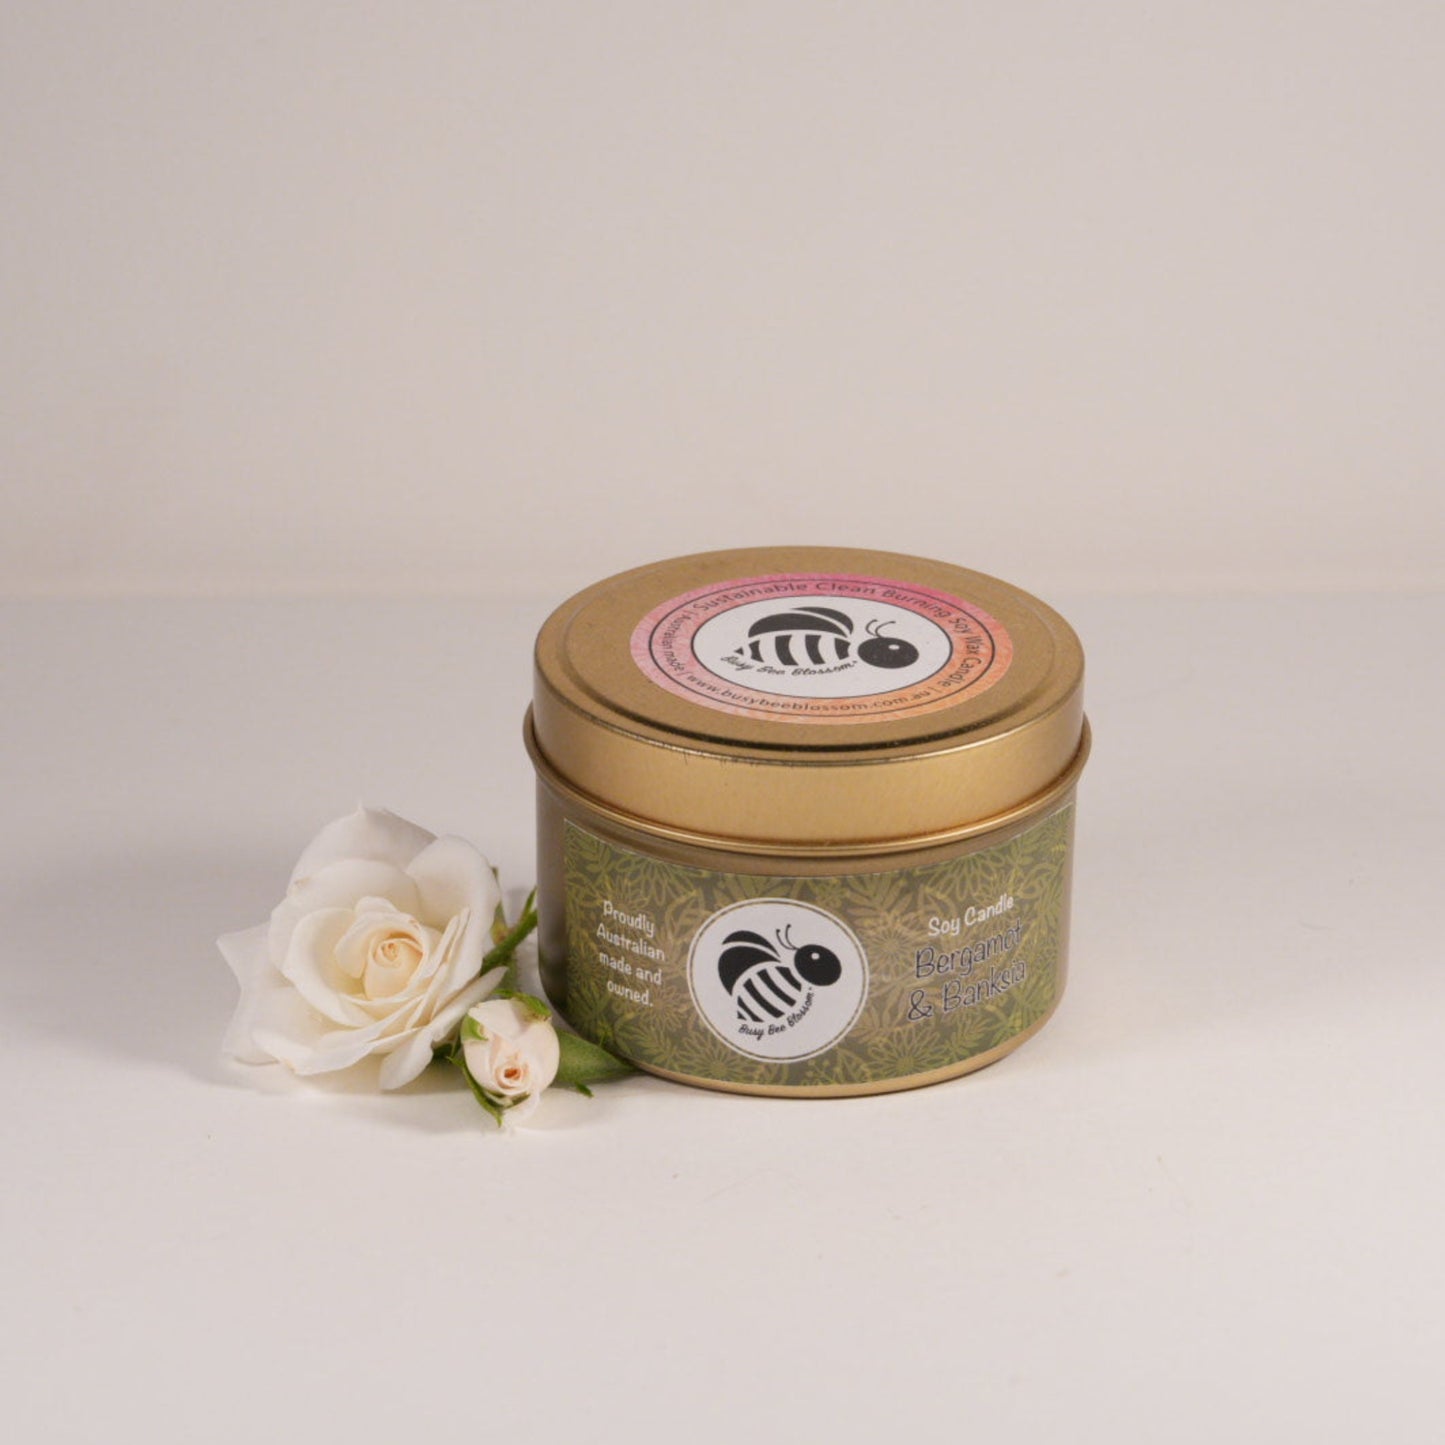 Bergamot and Banksia Gold Travel Tin Soy Candle with roses